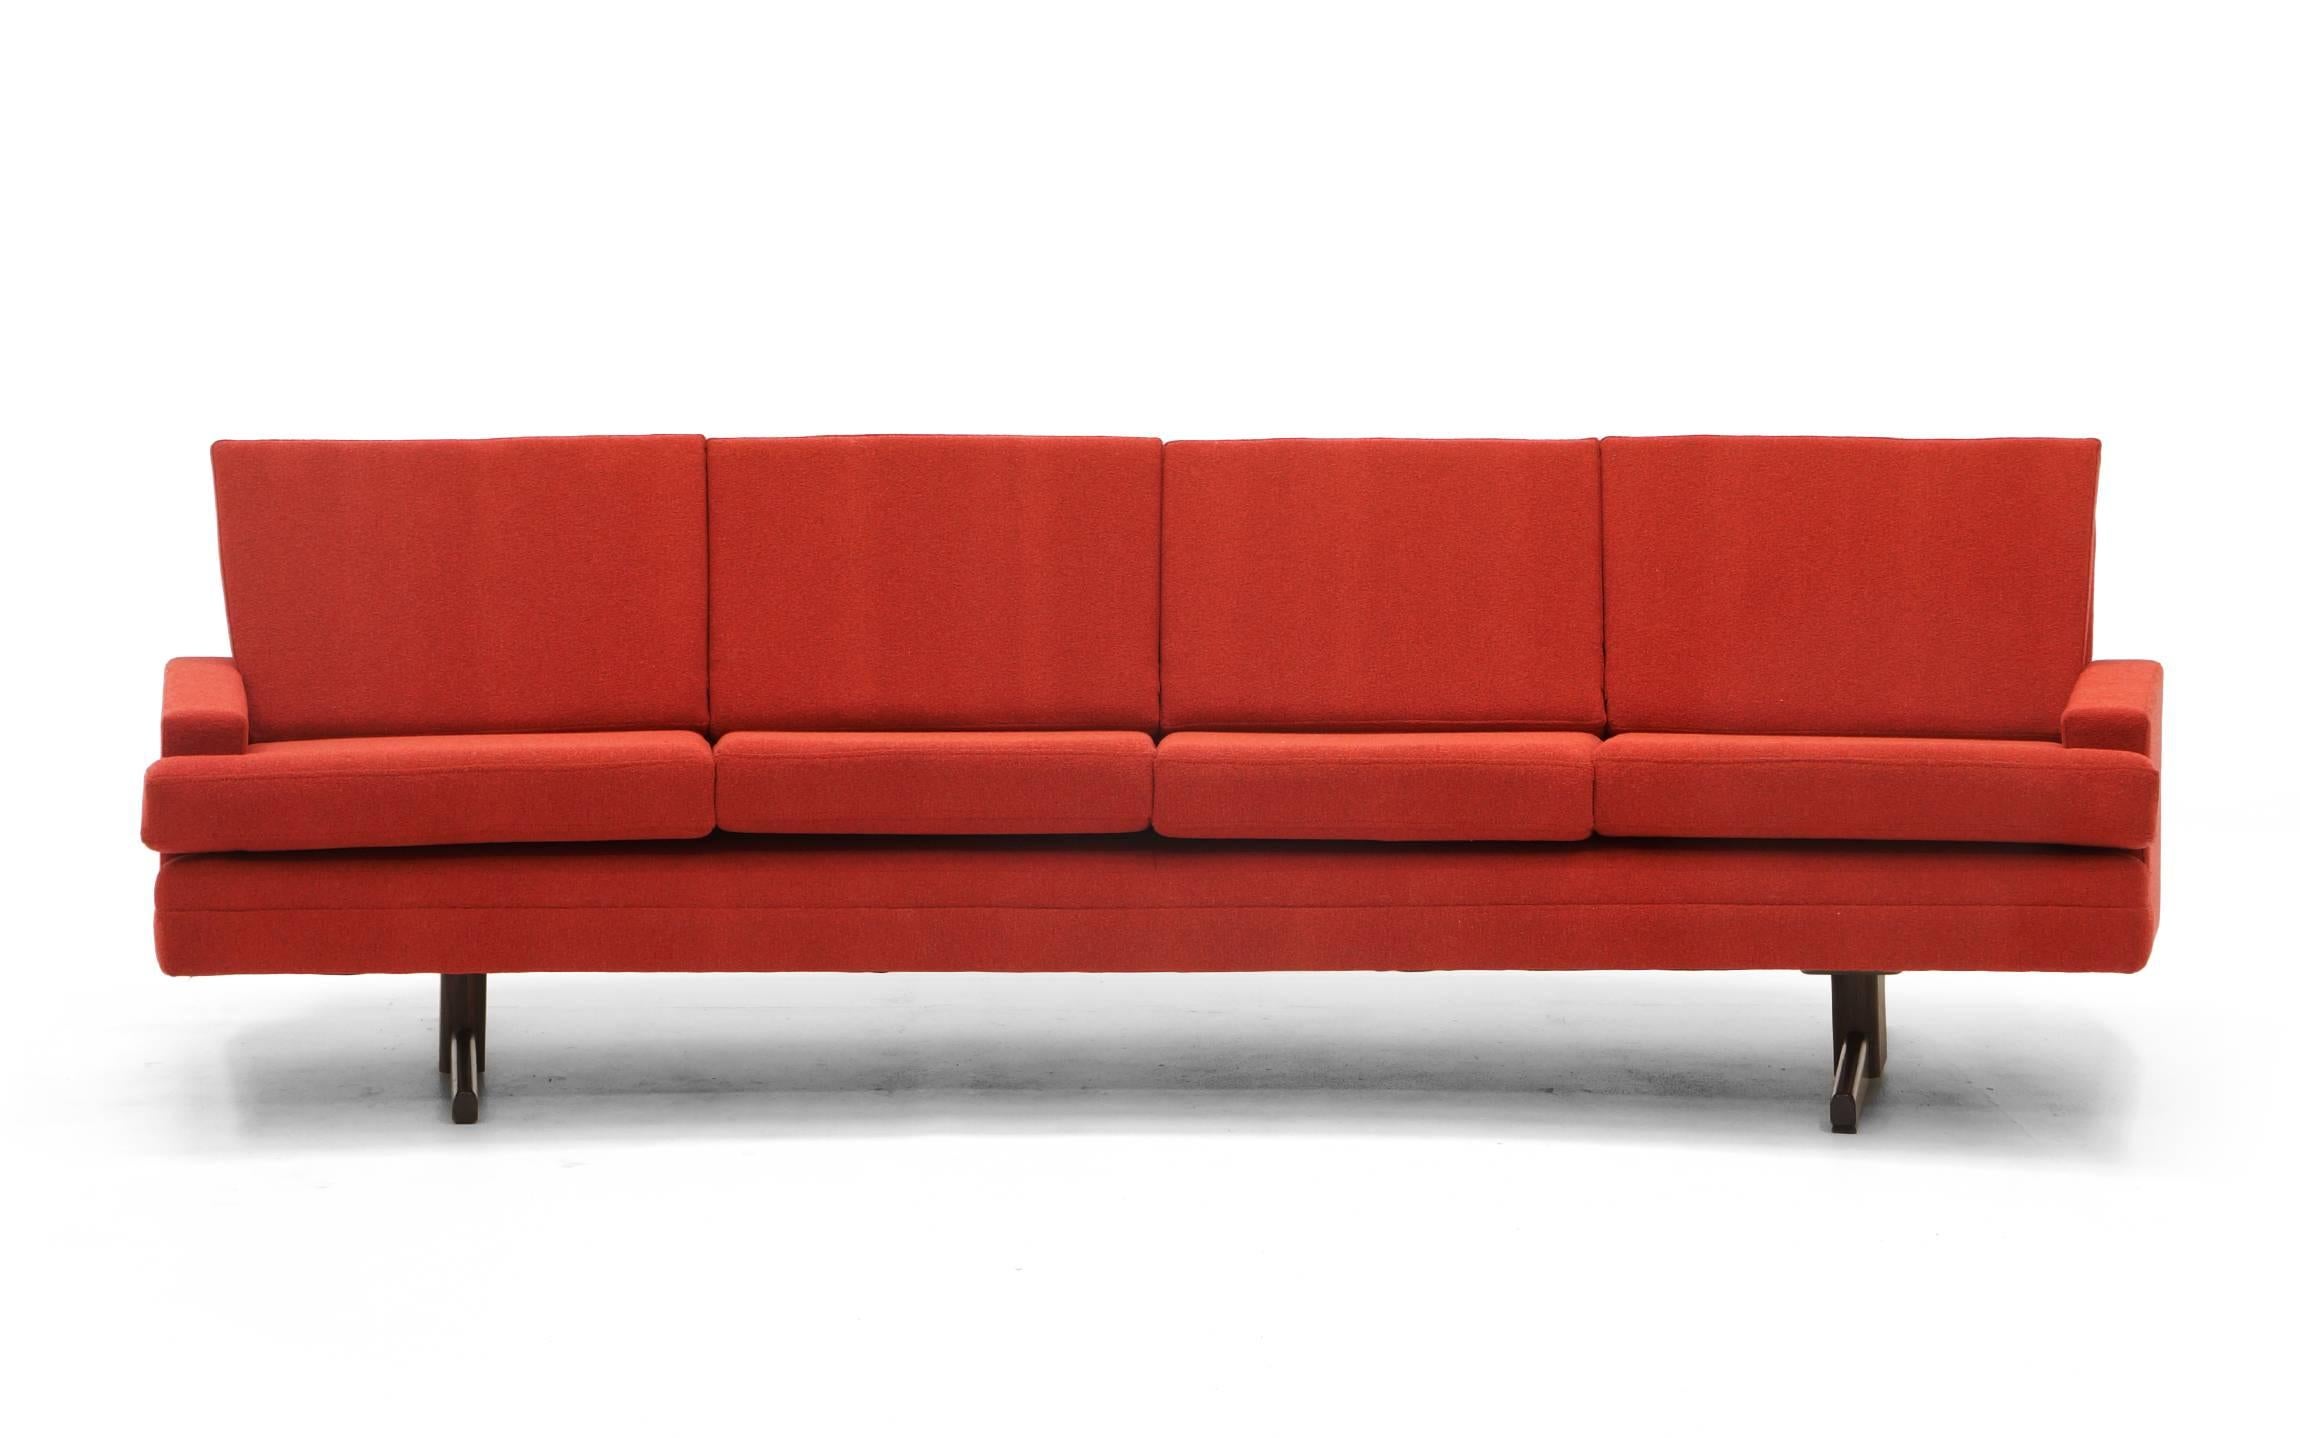 Curved sofa with Rosewood legs designed by Frederick A. Kayser for Vatne Mobler, Norway, 1960s. Completely restored and reupholstered in a deep red Knoll Cuddle Cloth. The fabric is mostly red with charcoal thread as well. Cuddle Cloth is $100 per